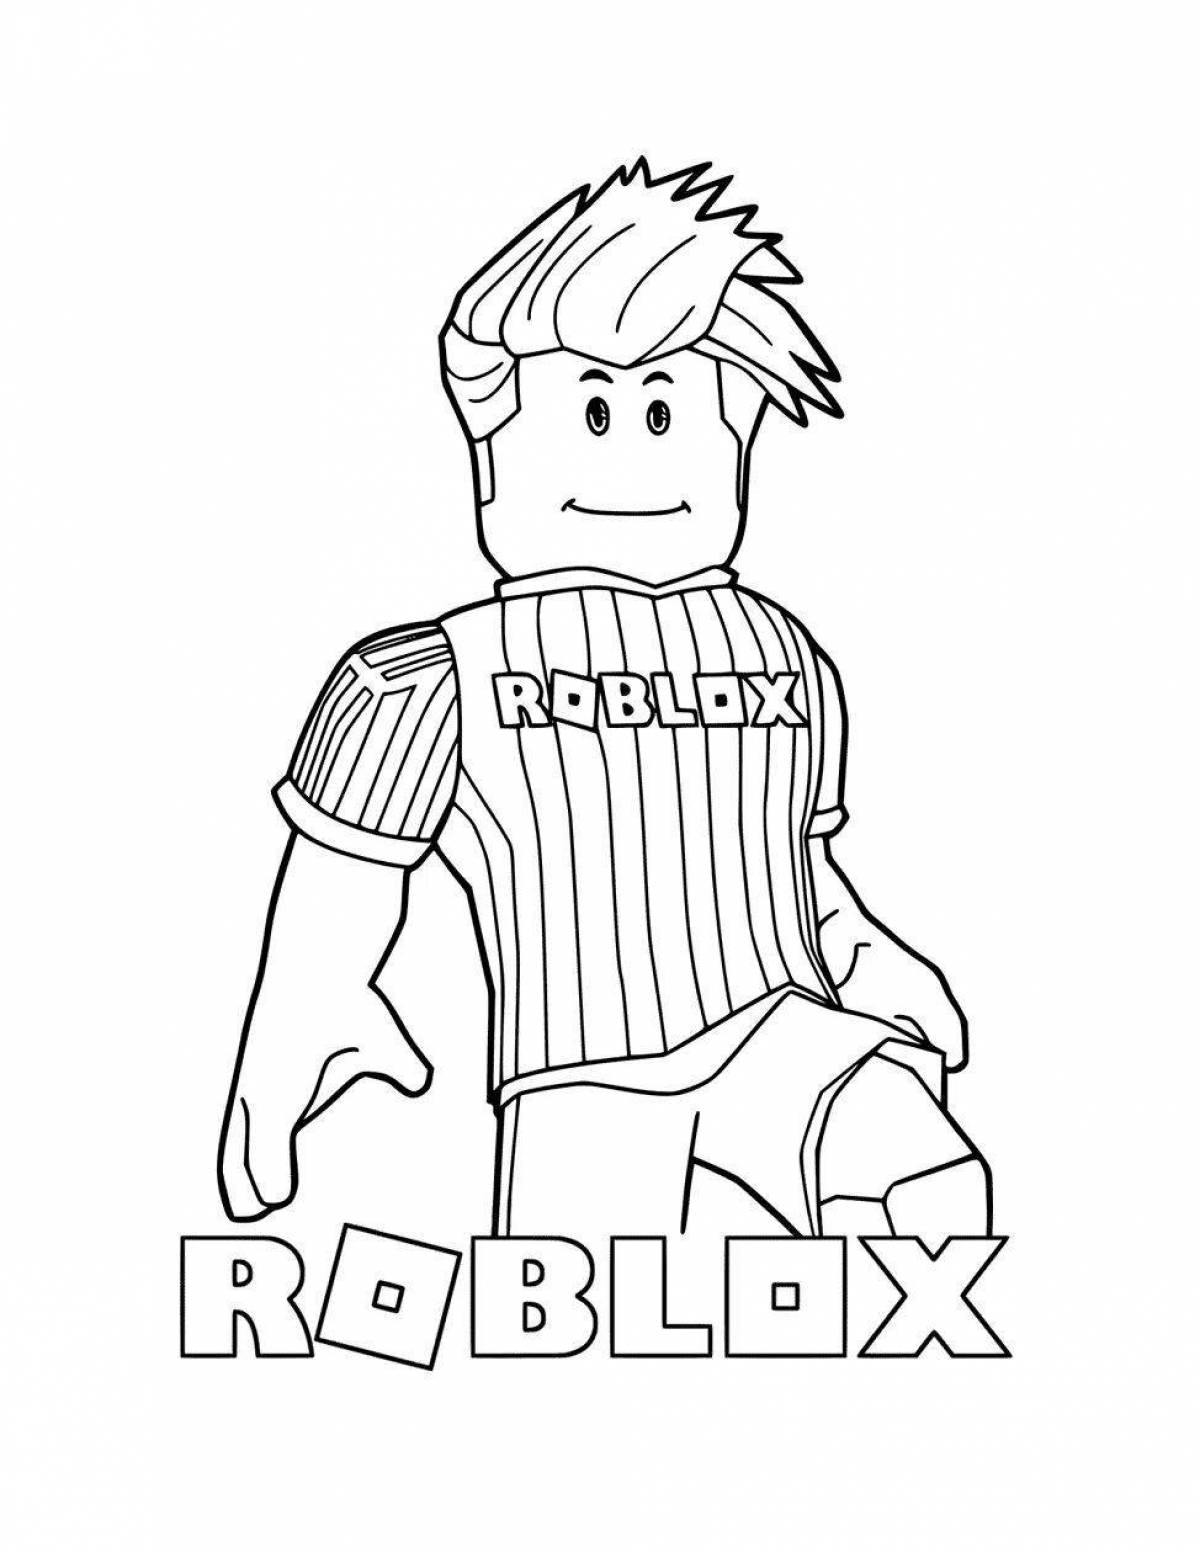 Roblox dors figure coloring page